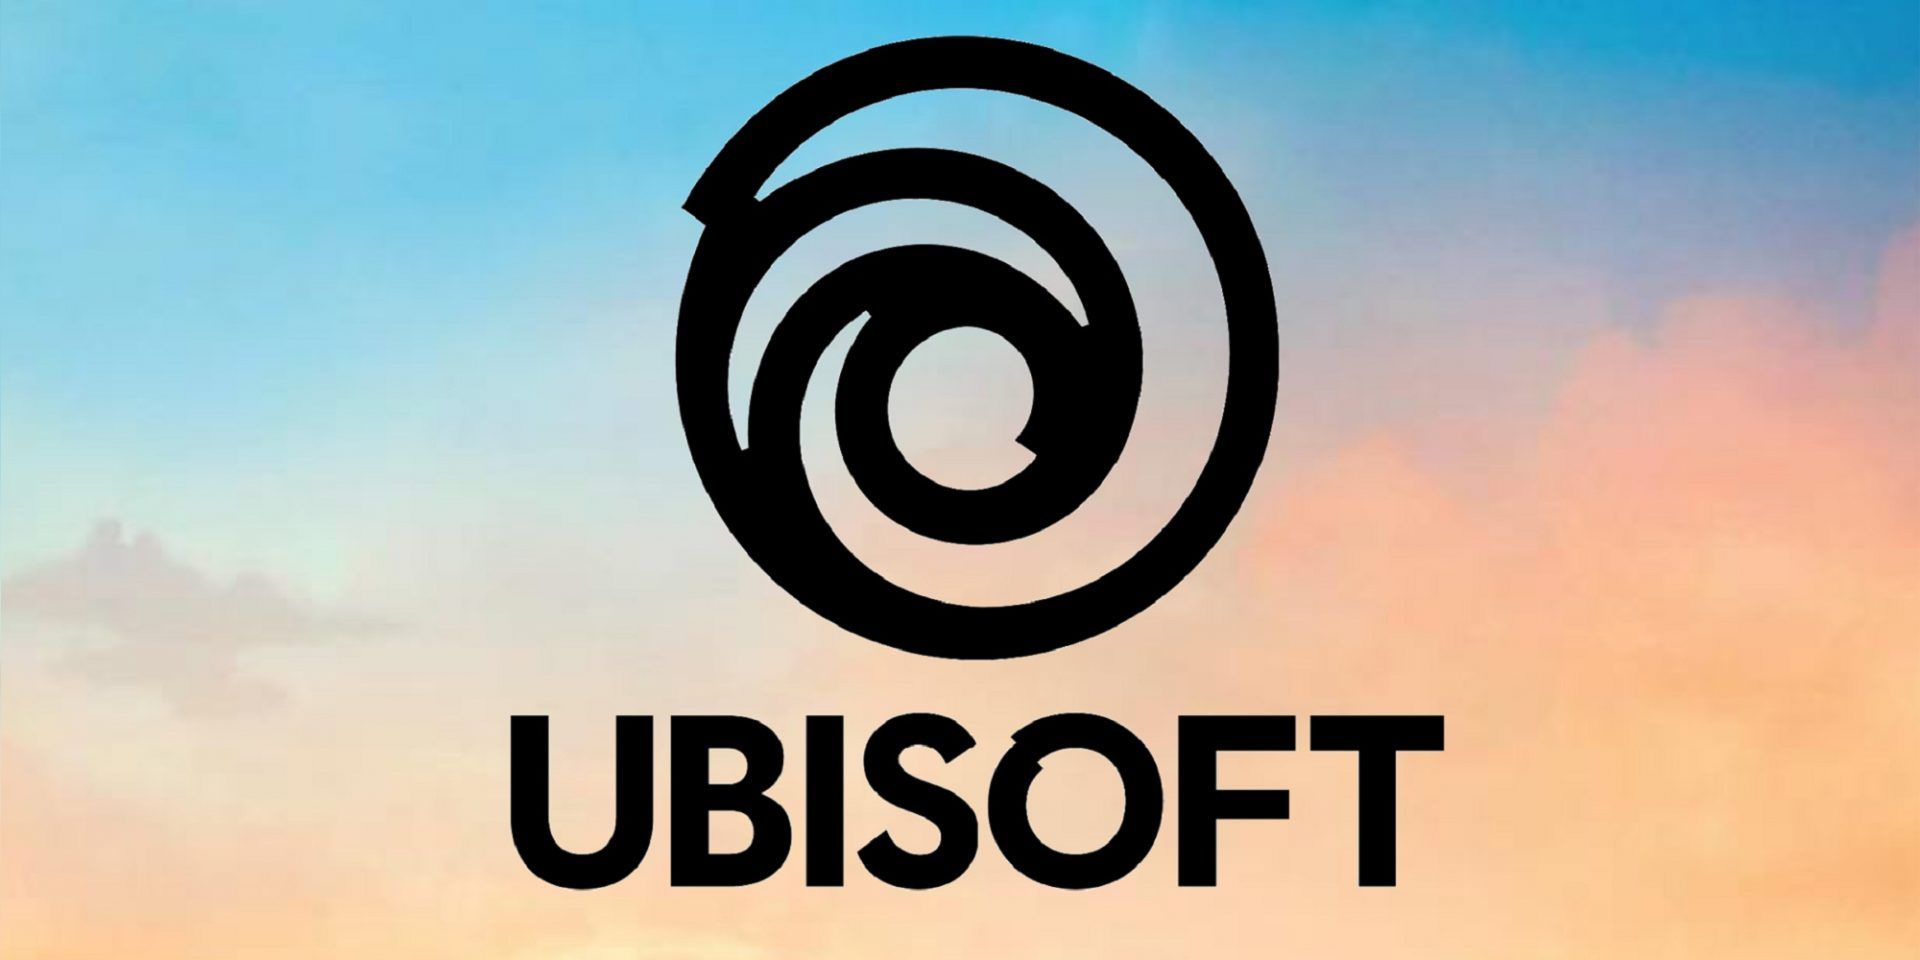 Tencent approaches Ubisoft to increase stakes.